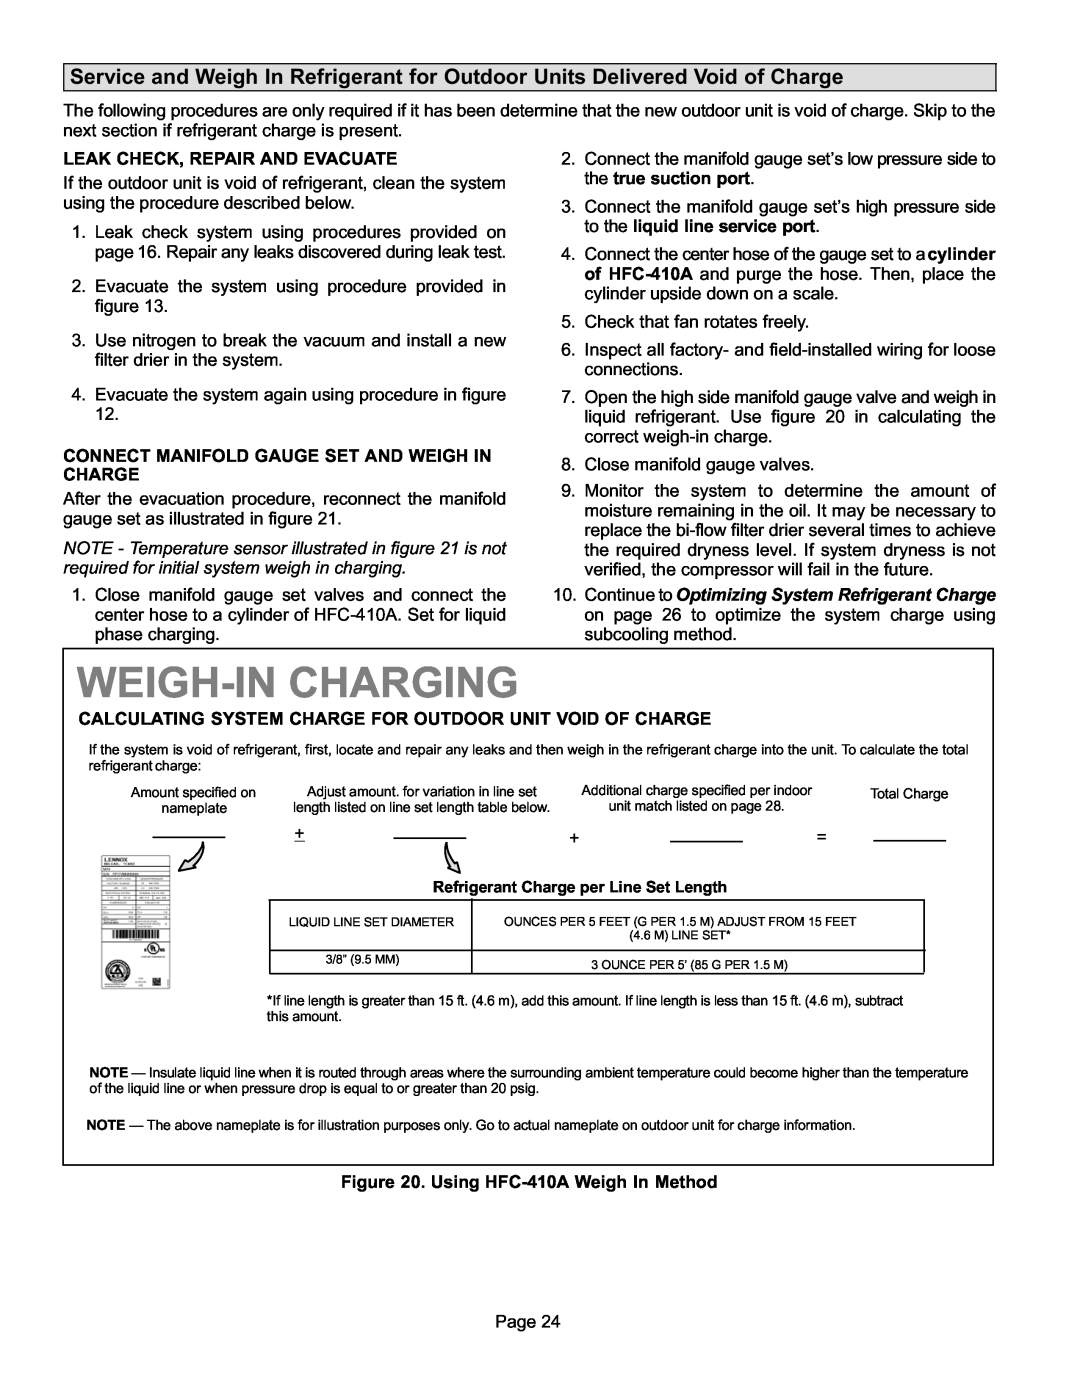 Lenox P506640-01, Elite Series XP16 Units Heat Pumps installation instructions Weigh−In Charging 